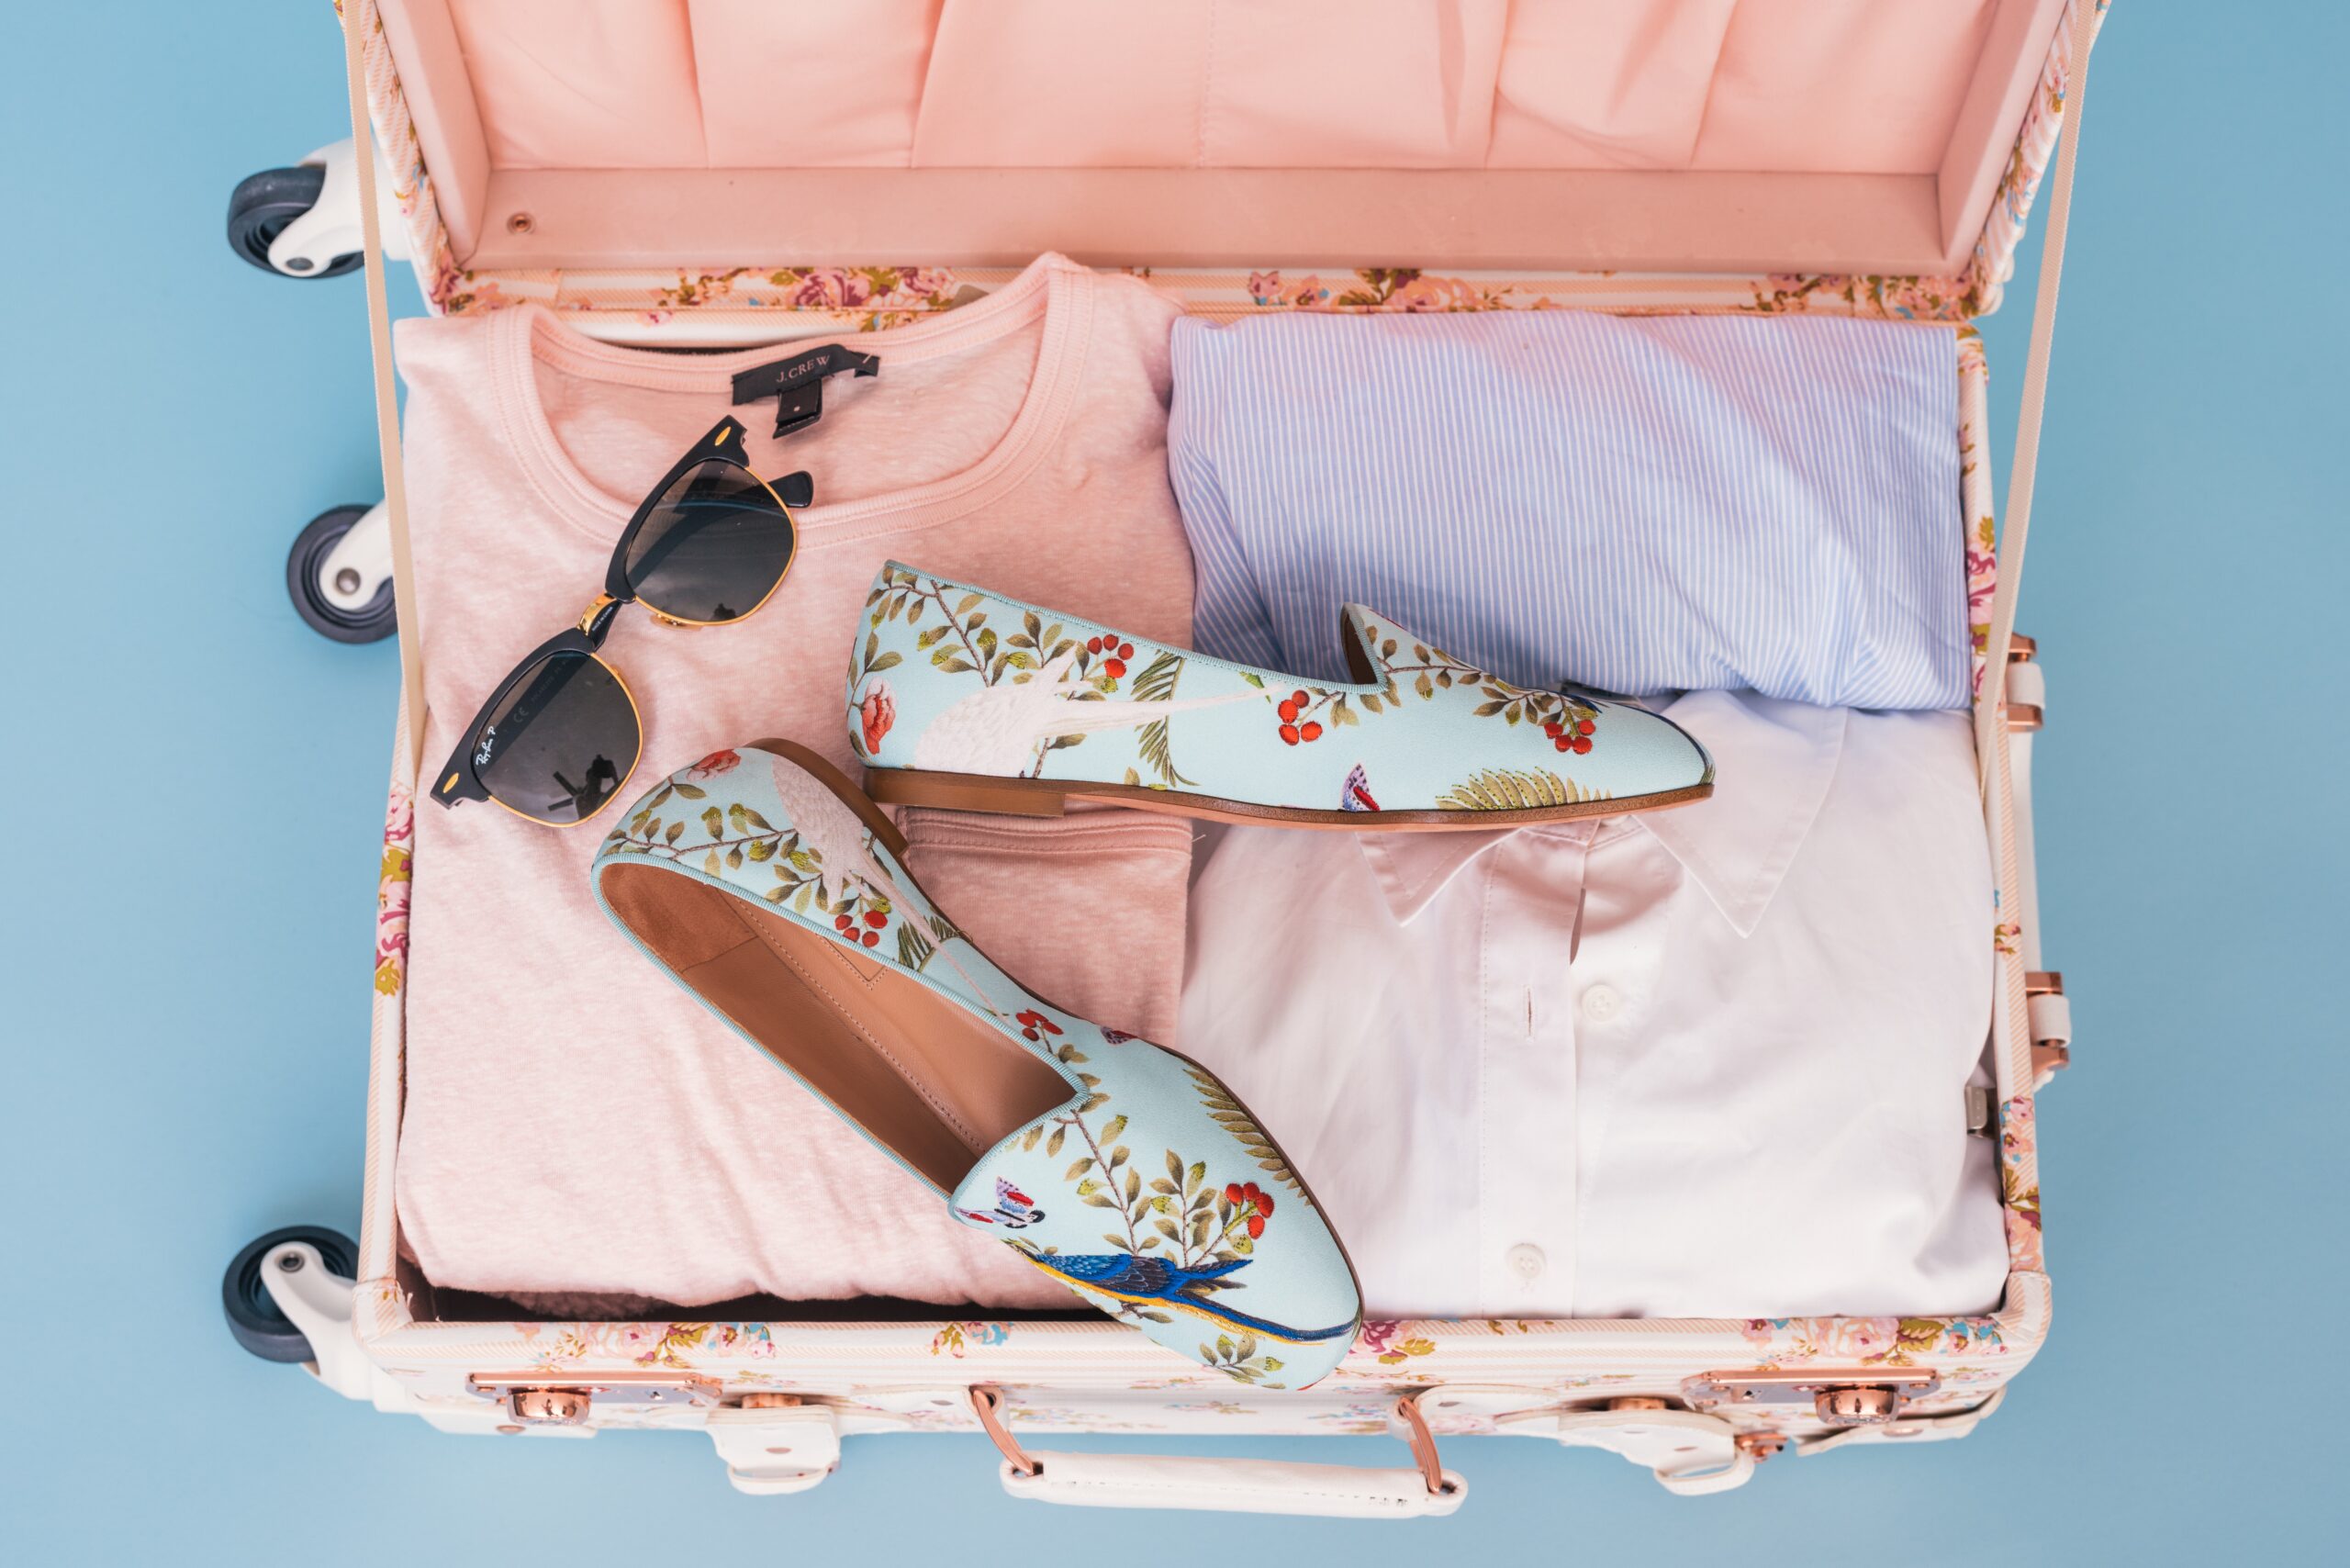 Packing tips for travel